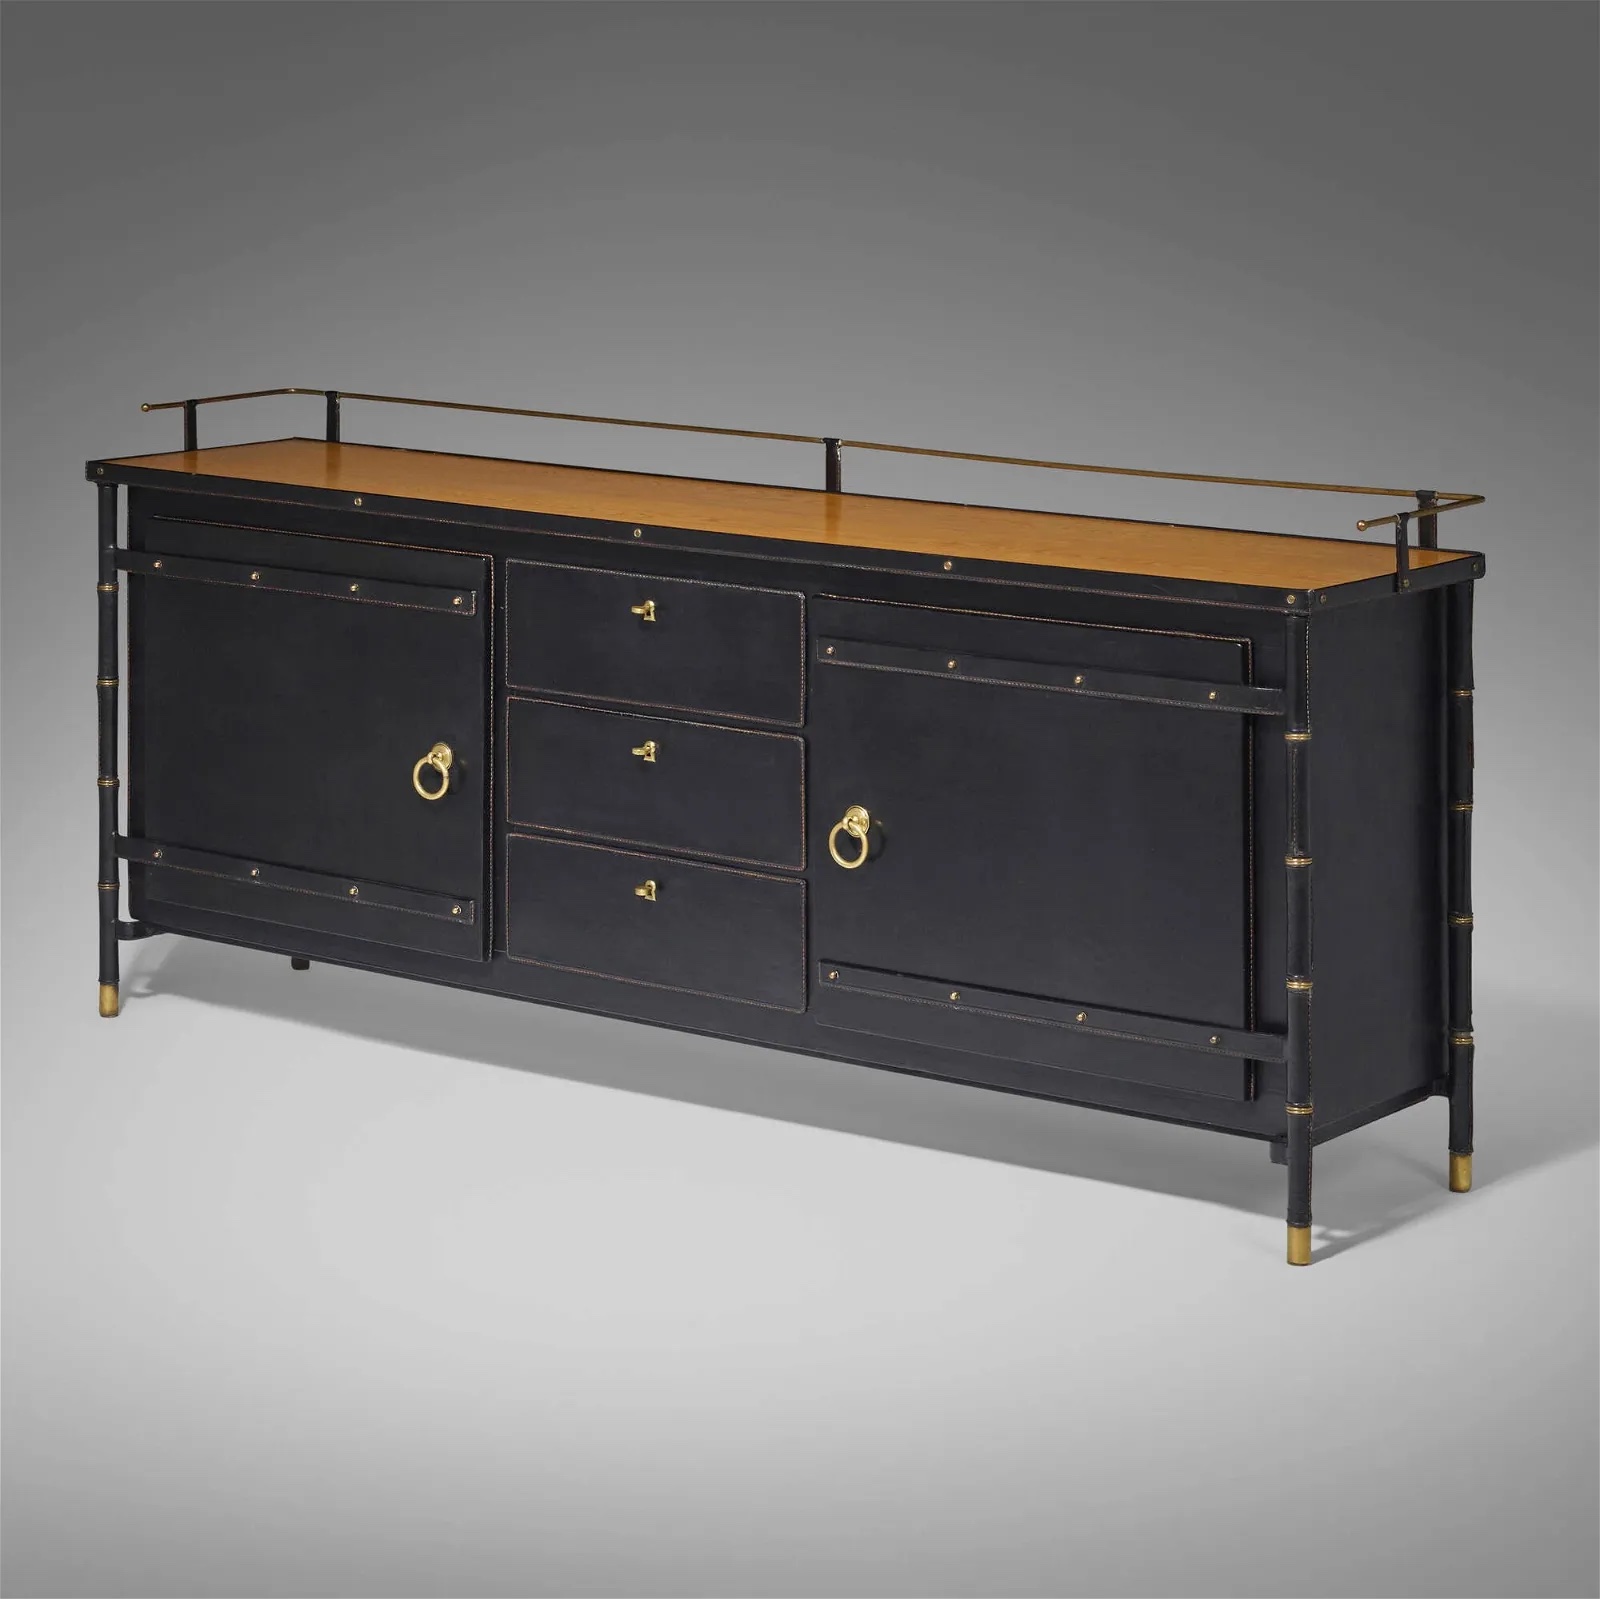 Adnet and Quinet midcentury works were in strong demand at LAMA